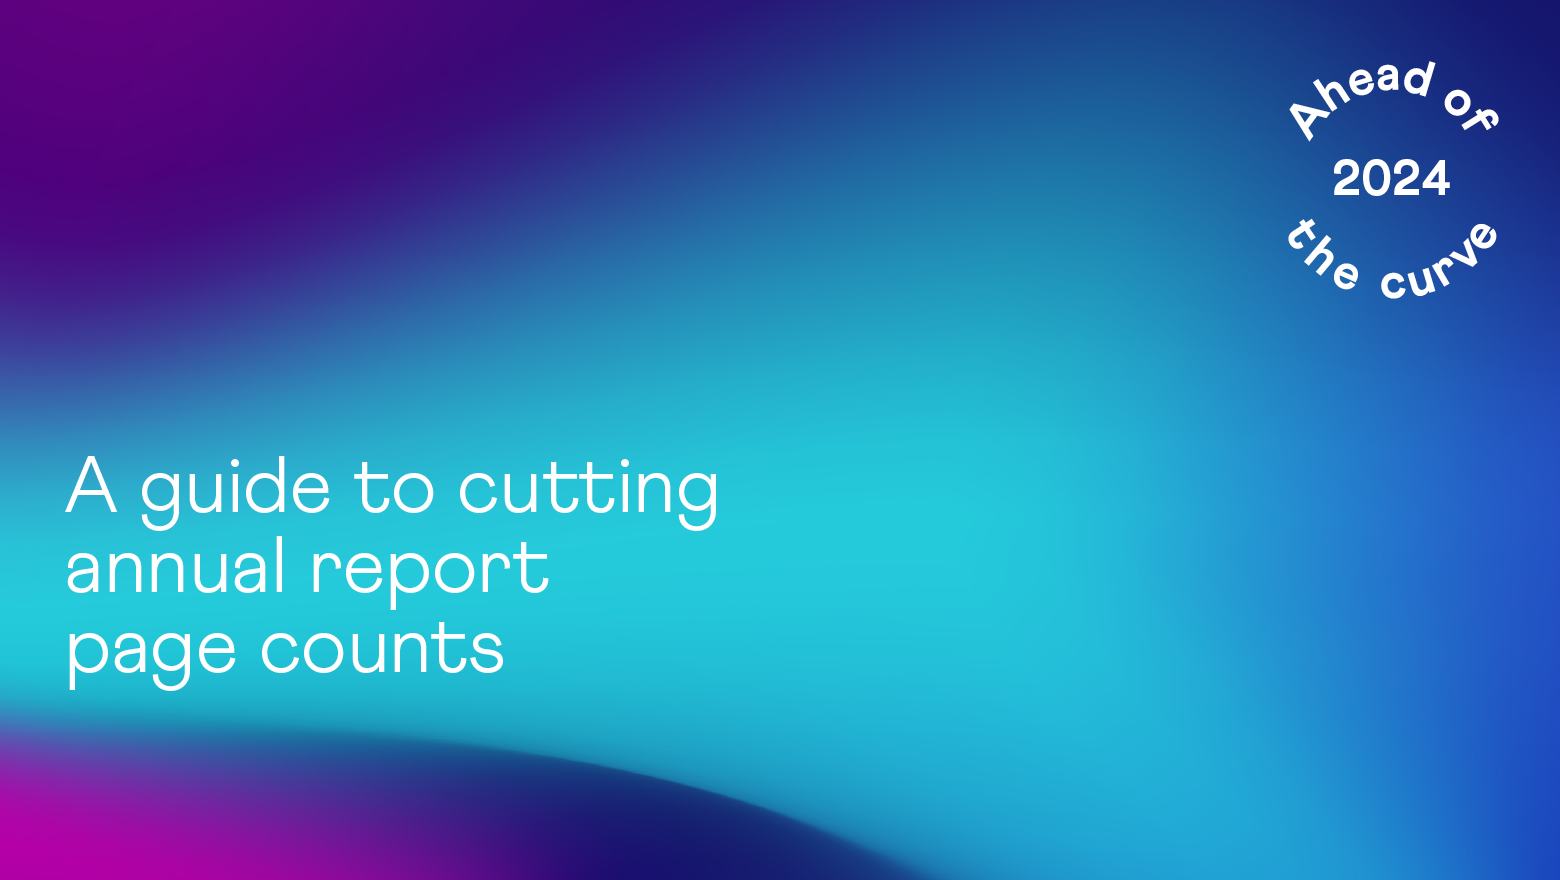 Streamlining annual reports: a guide to cutting page counts